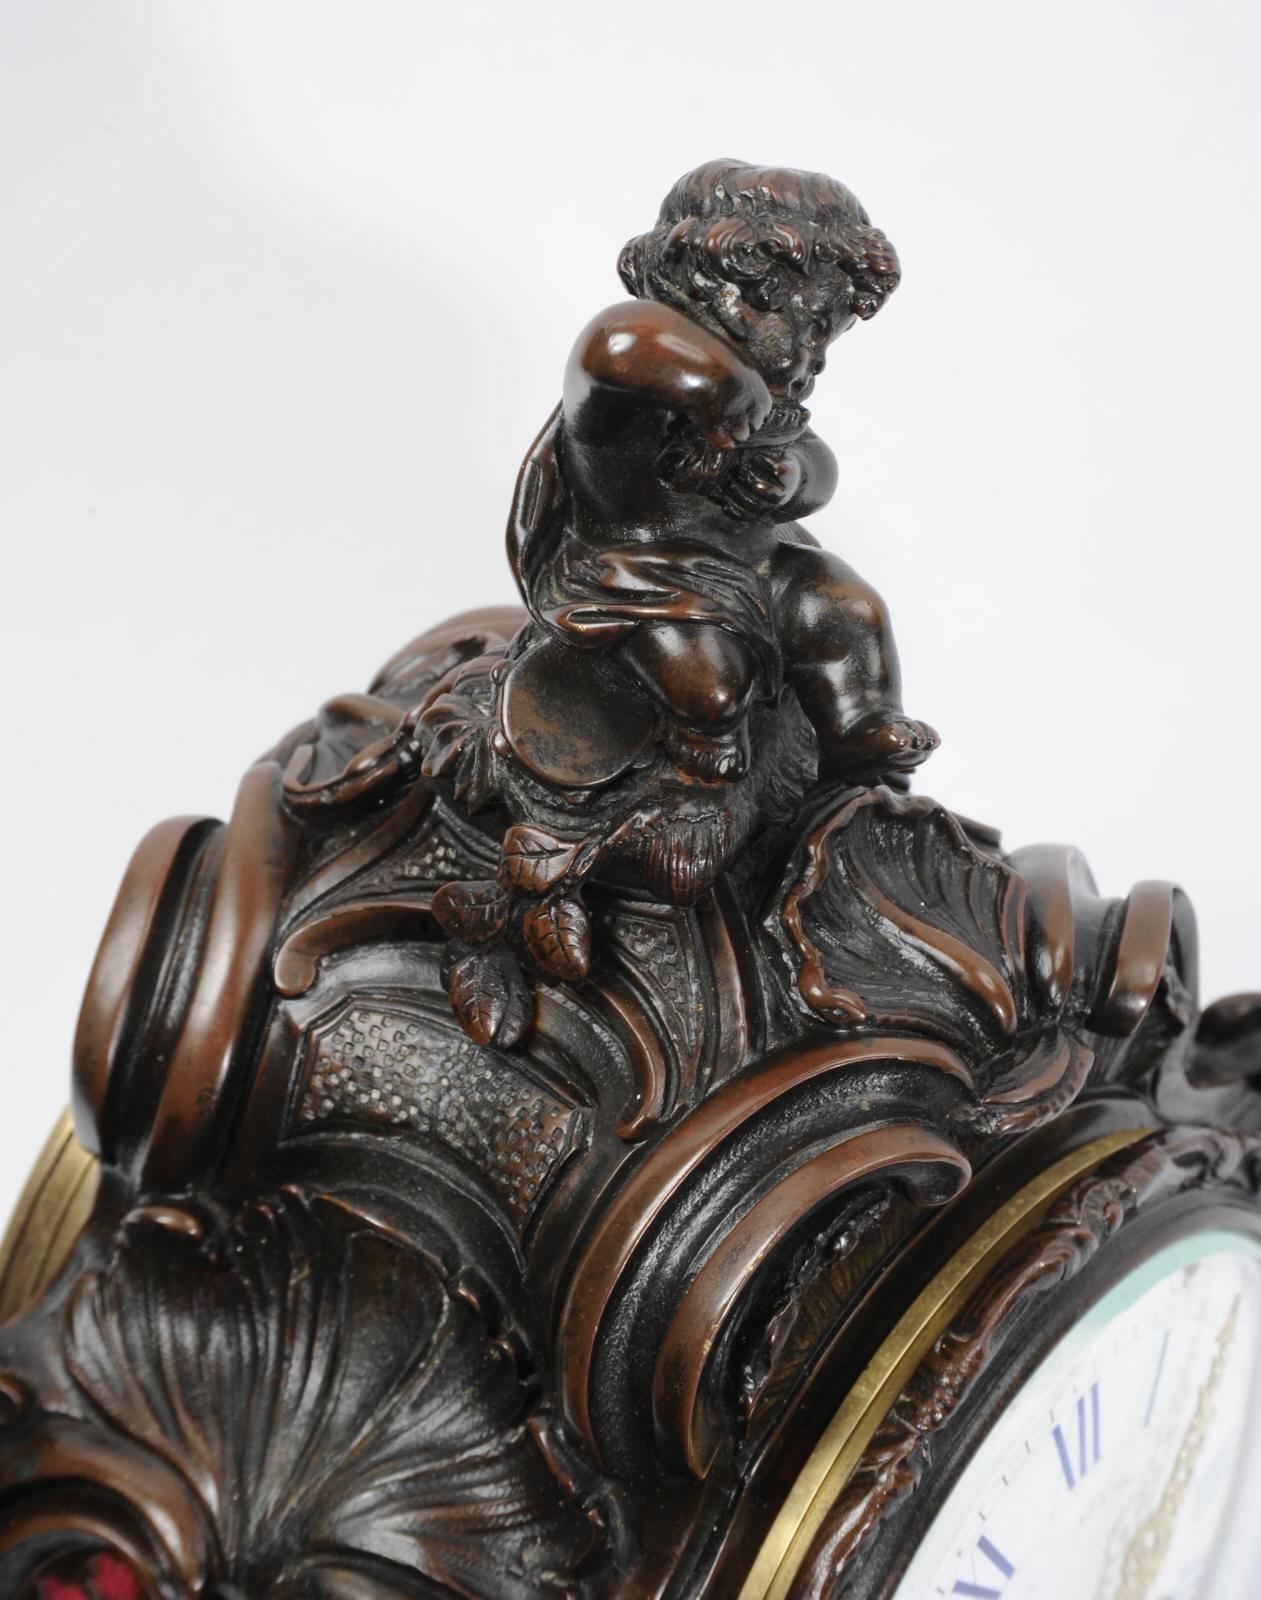 A superb original antique French Rococo clock by the famous maker Japy Freres, circa 1890. Beautifully detailed bronze case with C scrolls, acanthus and shell motifs. A charming cherub is seated to the top plays pipes. Fretted sound panels backed